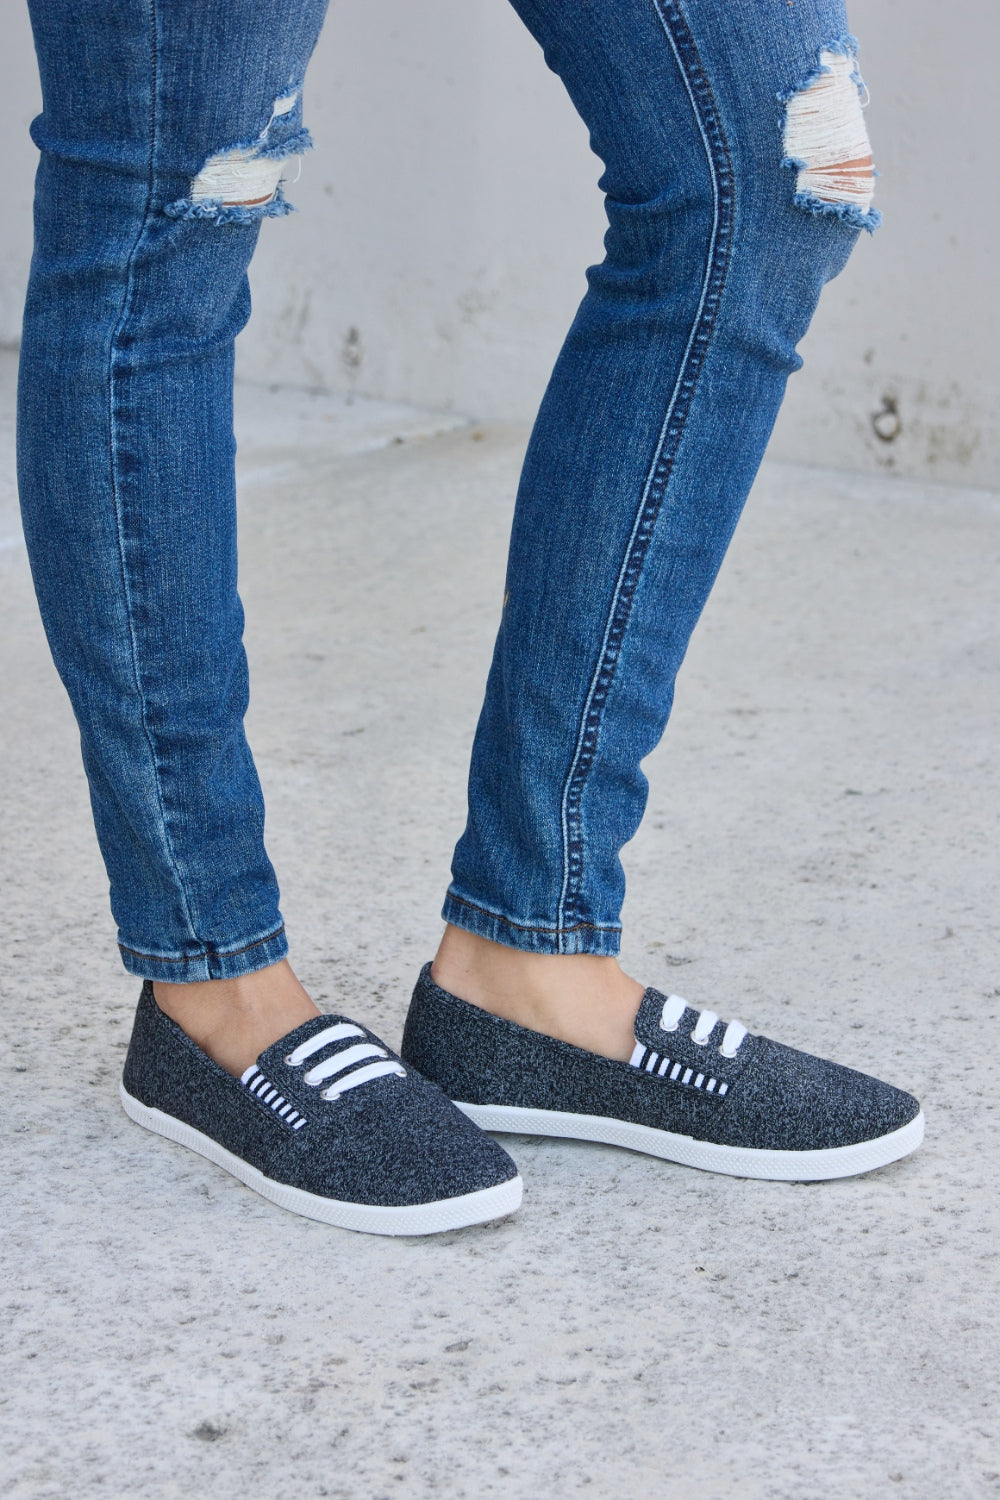 Forever Link Round Toe Slip-On Dark Gray Low Top Comfy Flat Sneakers